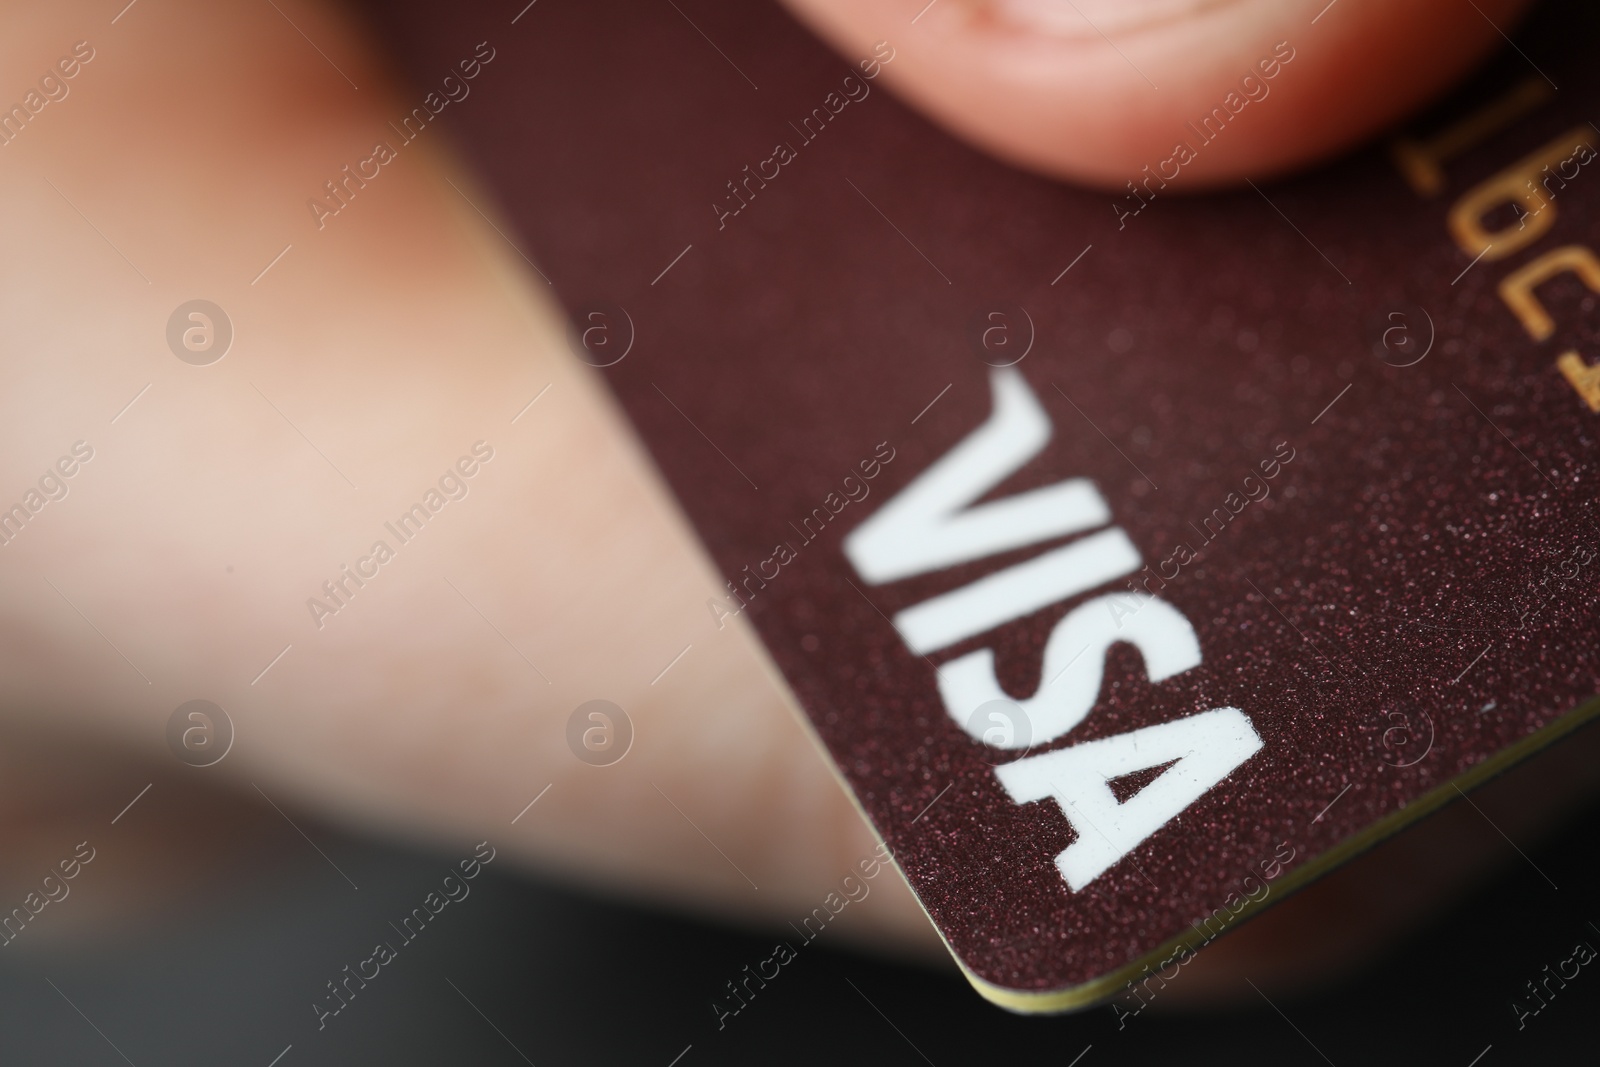 Photo of MYKOLAIV, UKRAINE - FEBRUARY 22, 2022: Woman holding Visa credit card, closeup. Space for text